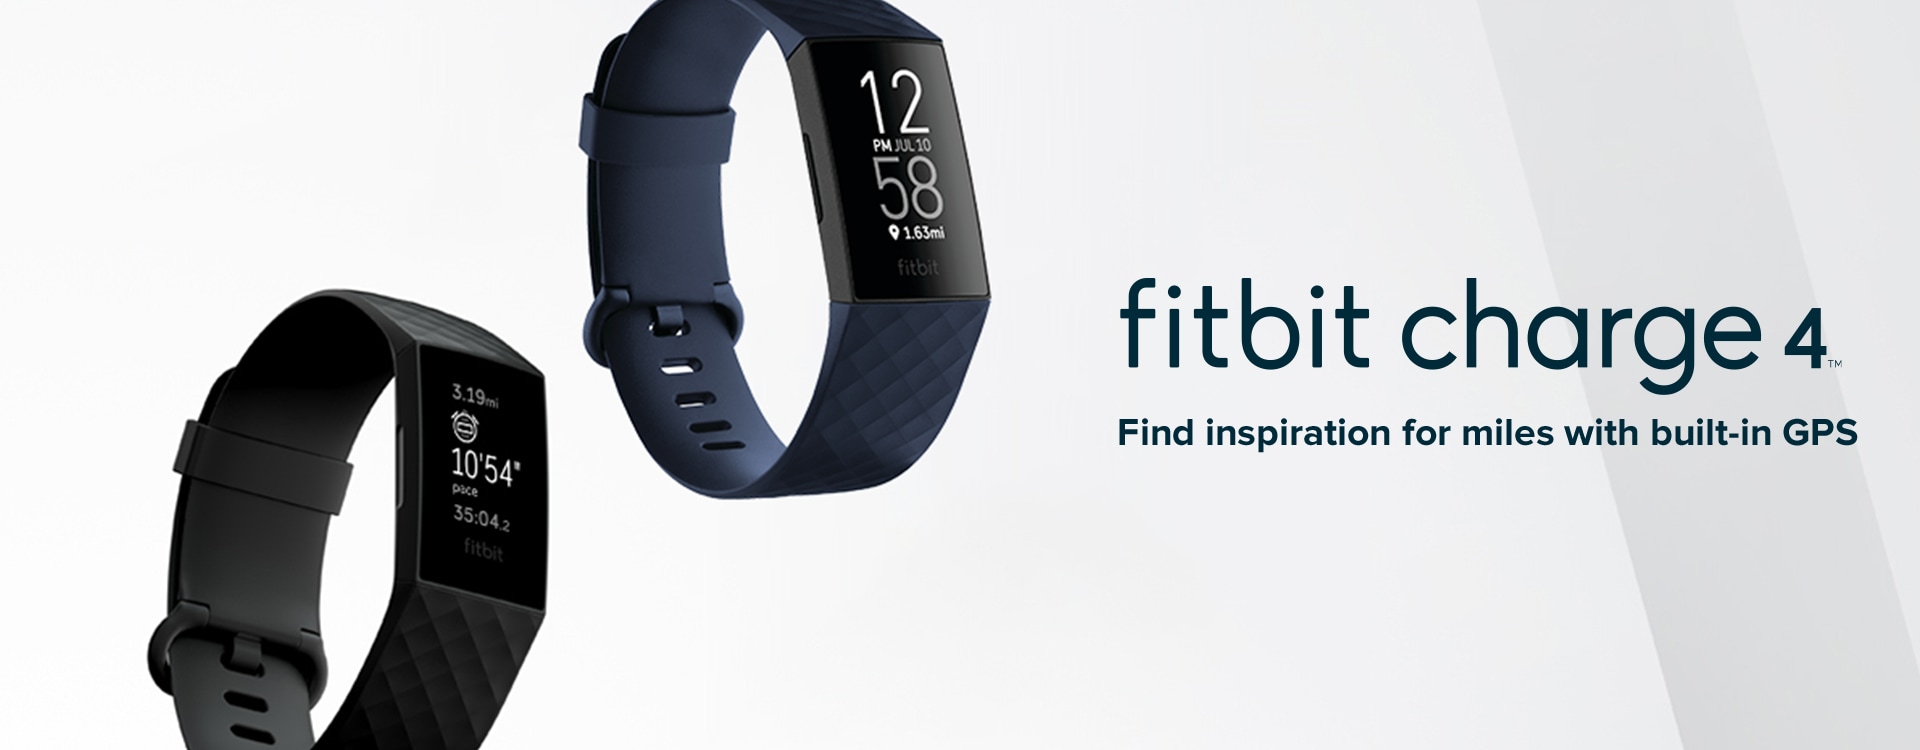 Fitbit Charge 4 Fitness Tracker Bundle $89.99 @ Costco or $99.99 @ Fitbit